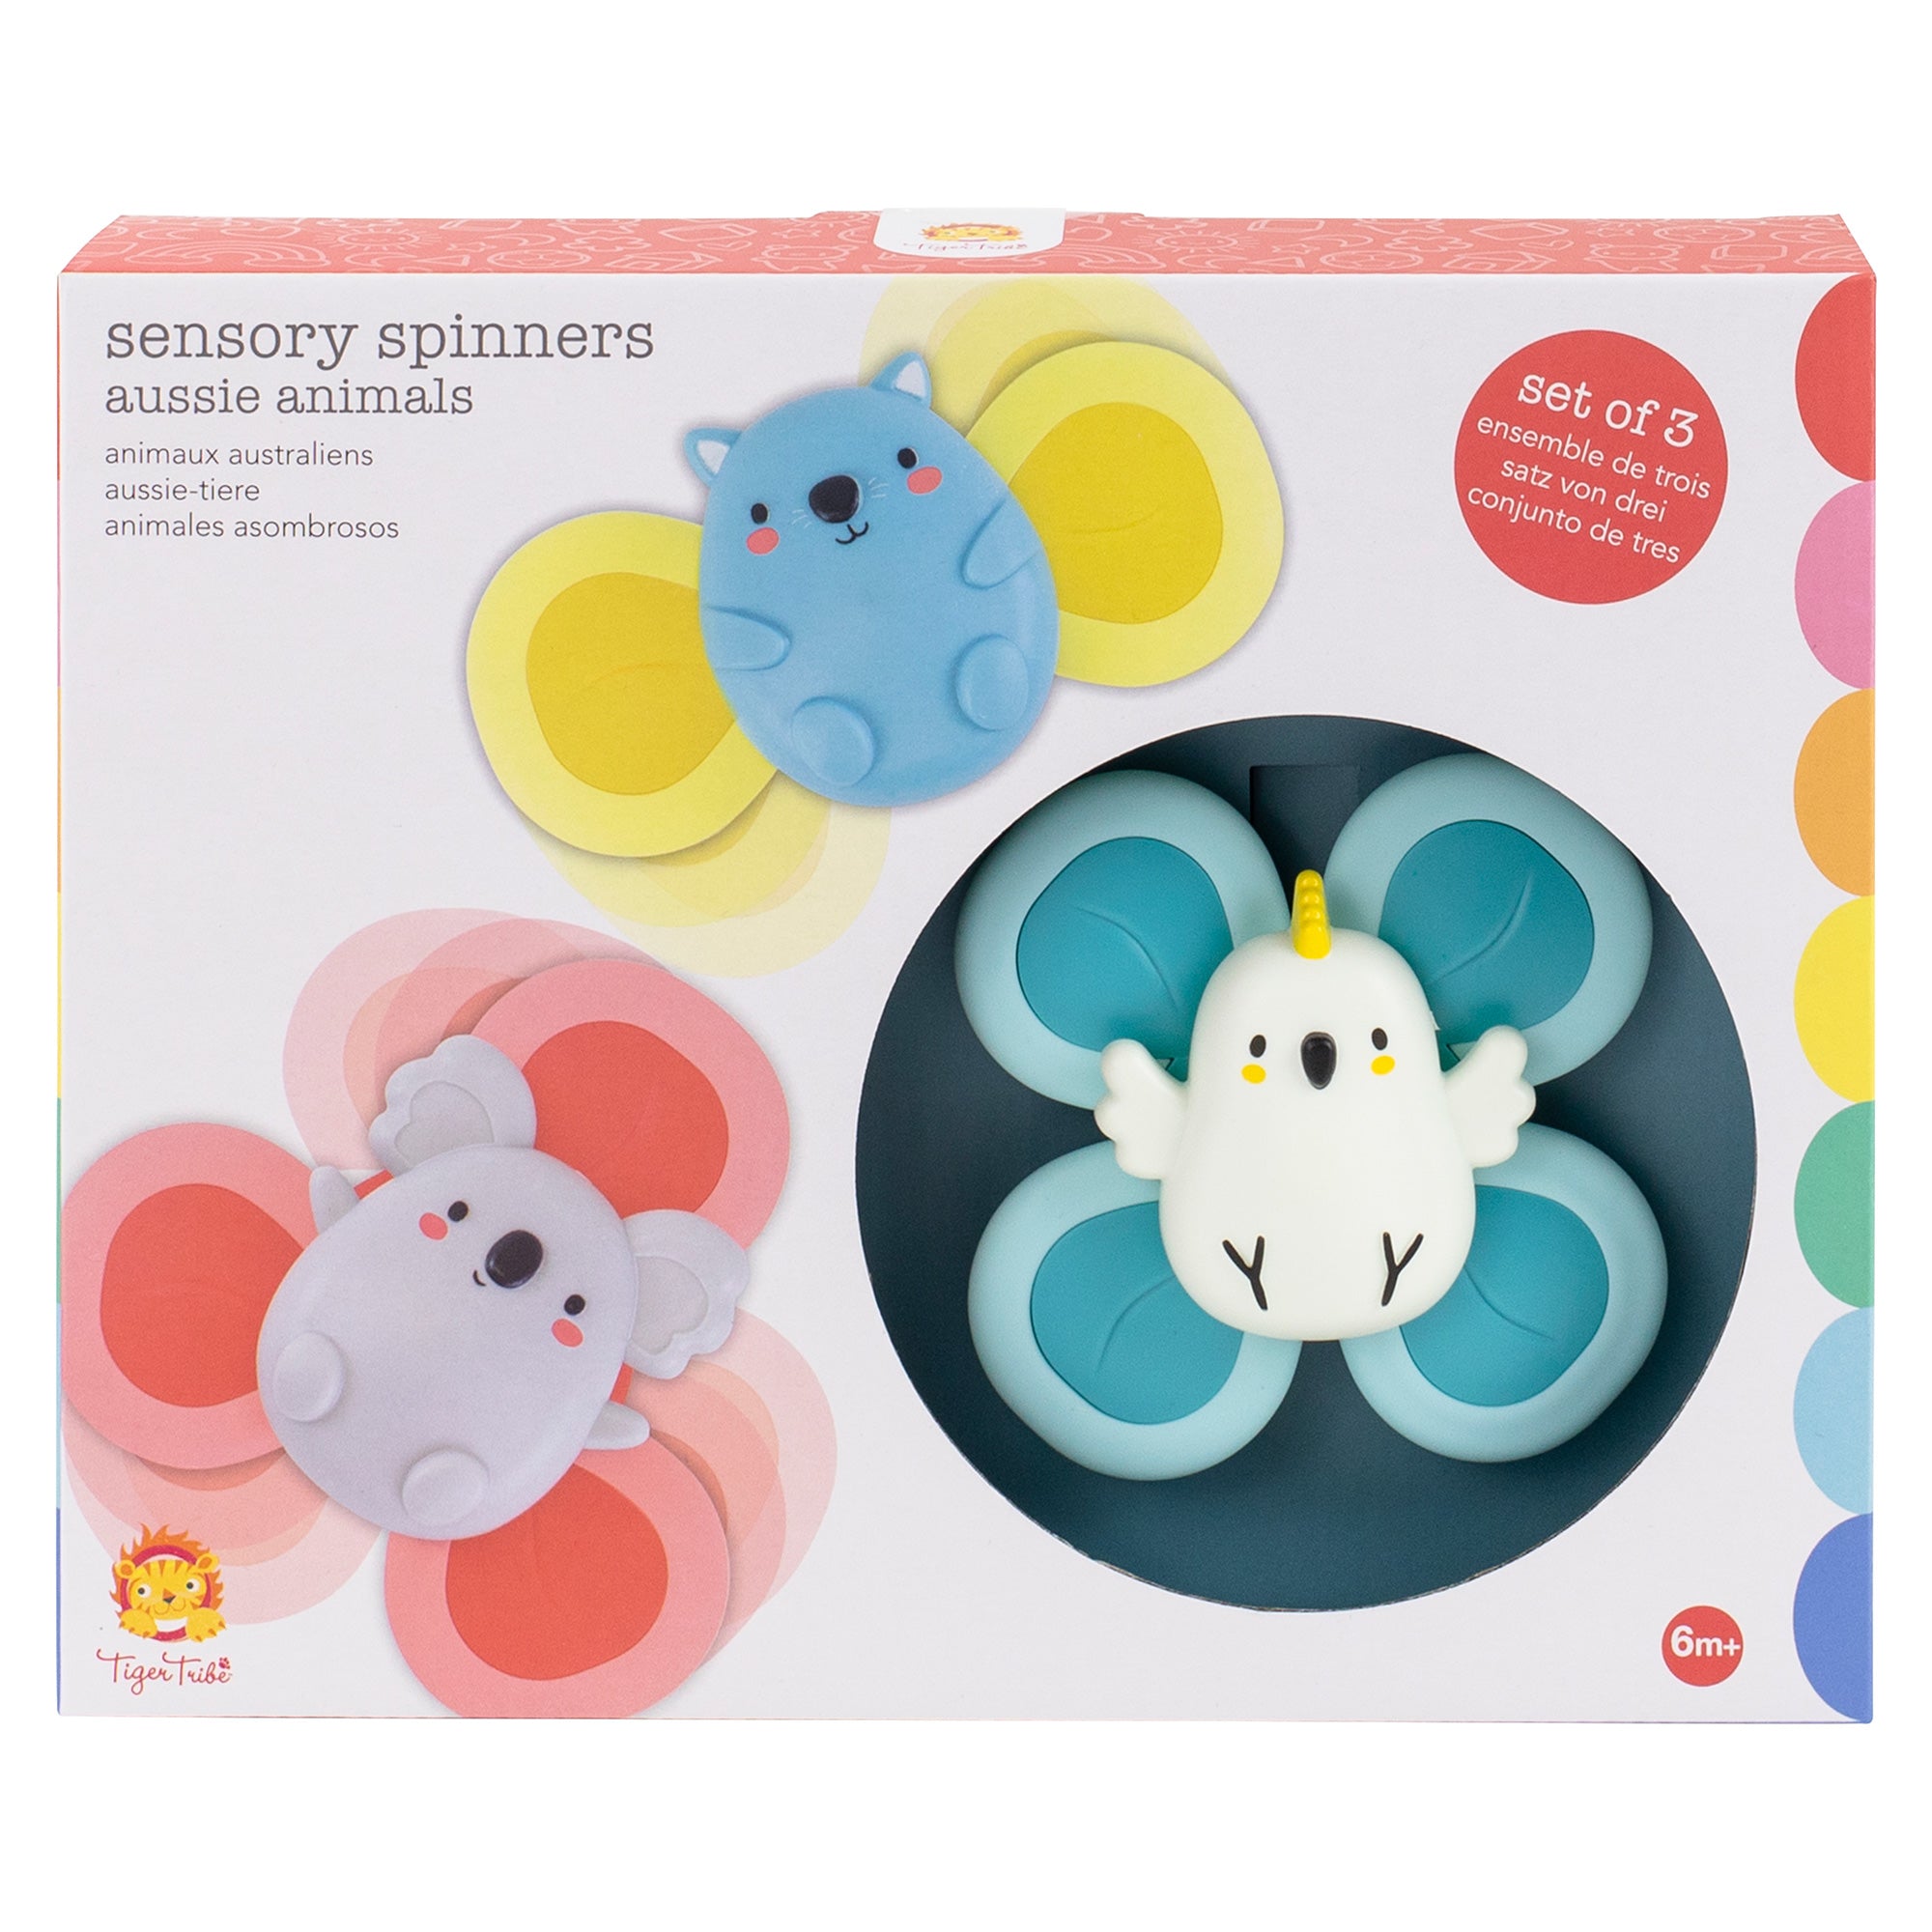 The product package for Sensory Spinners.